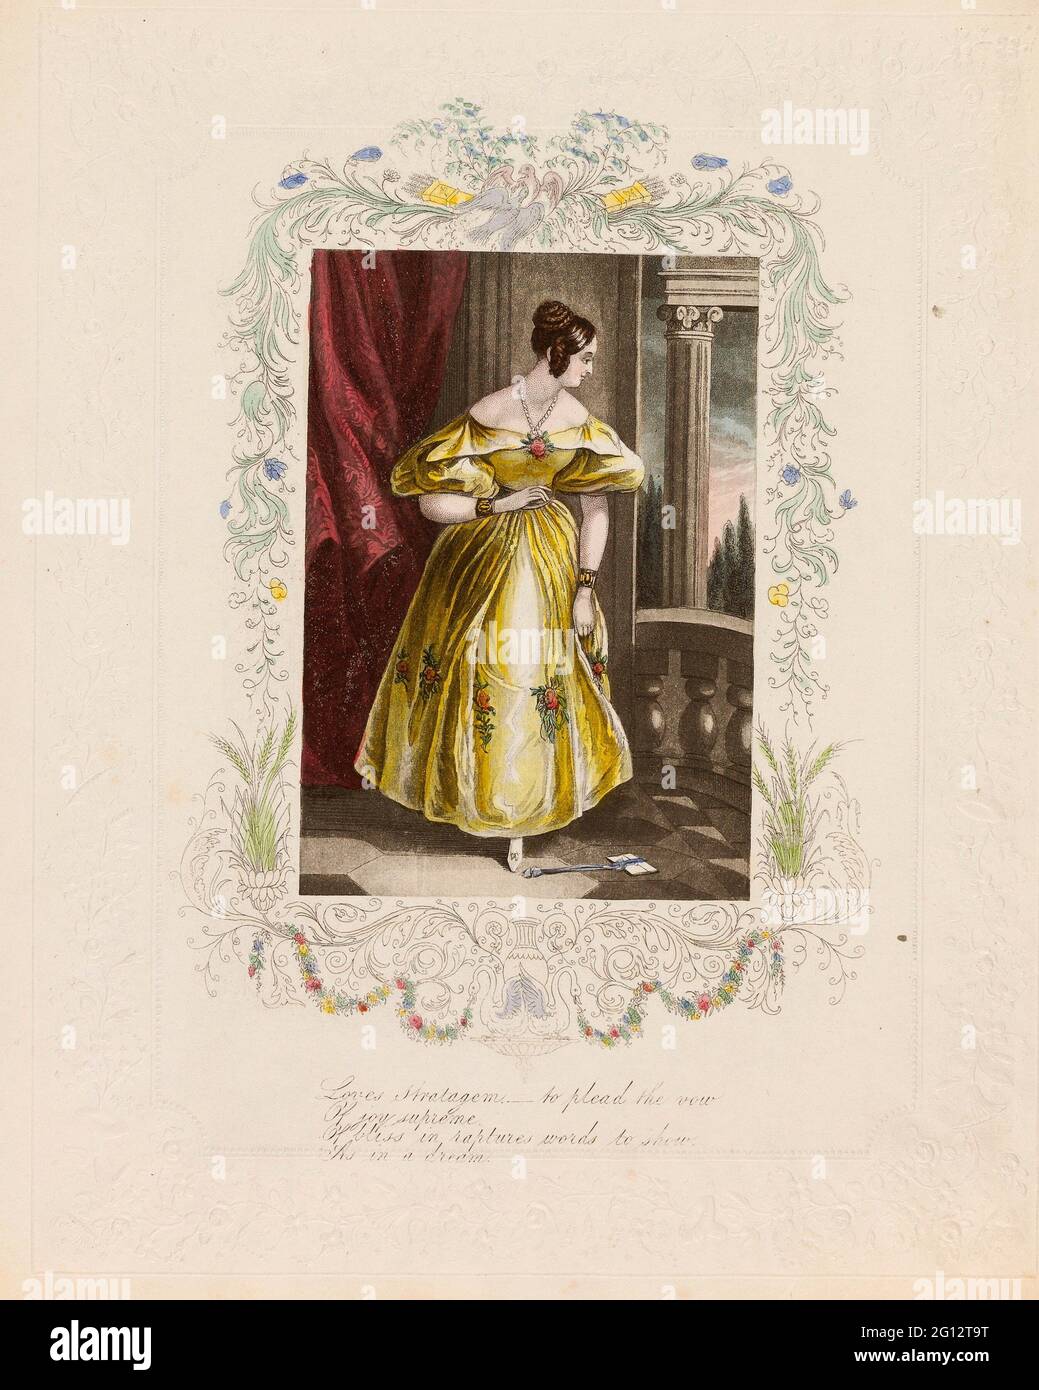 Love - s Strategem (Valentine) - c. 1840 - Unknown Artist English, 19th century. Lithograph with hand-coloring on embossed off-white wove paper. 1835 Stock Photo